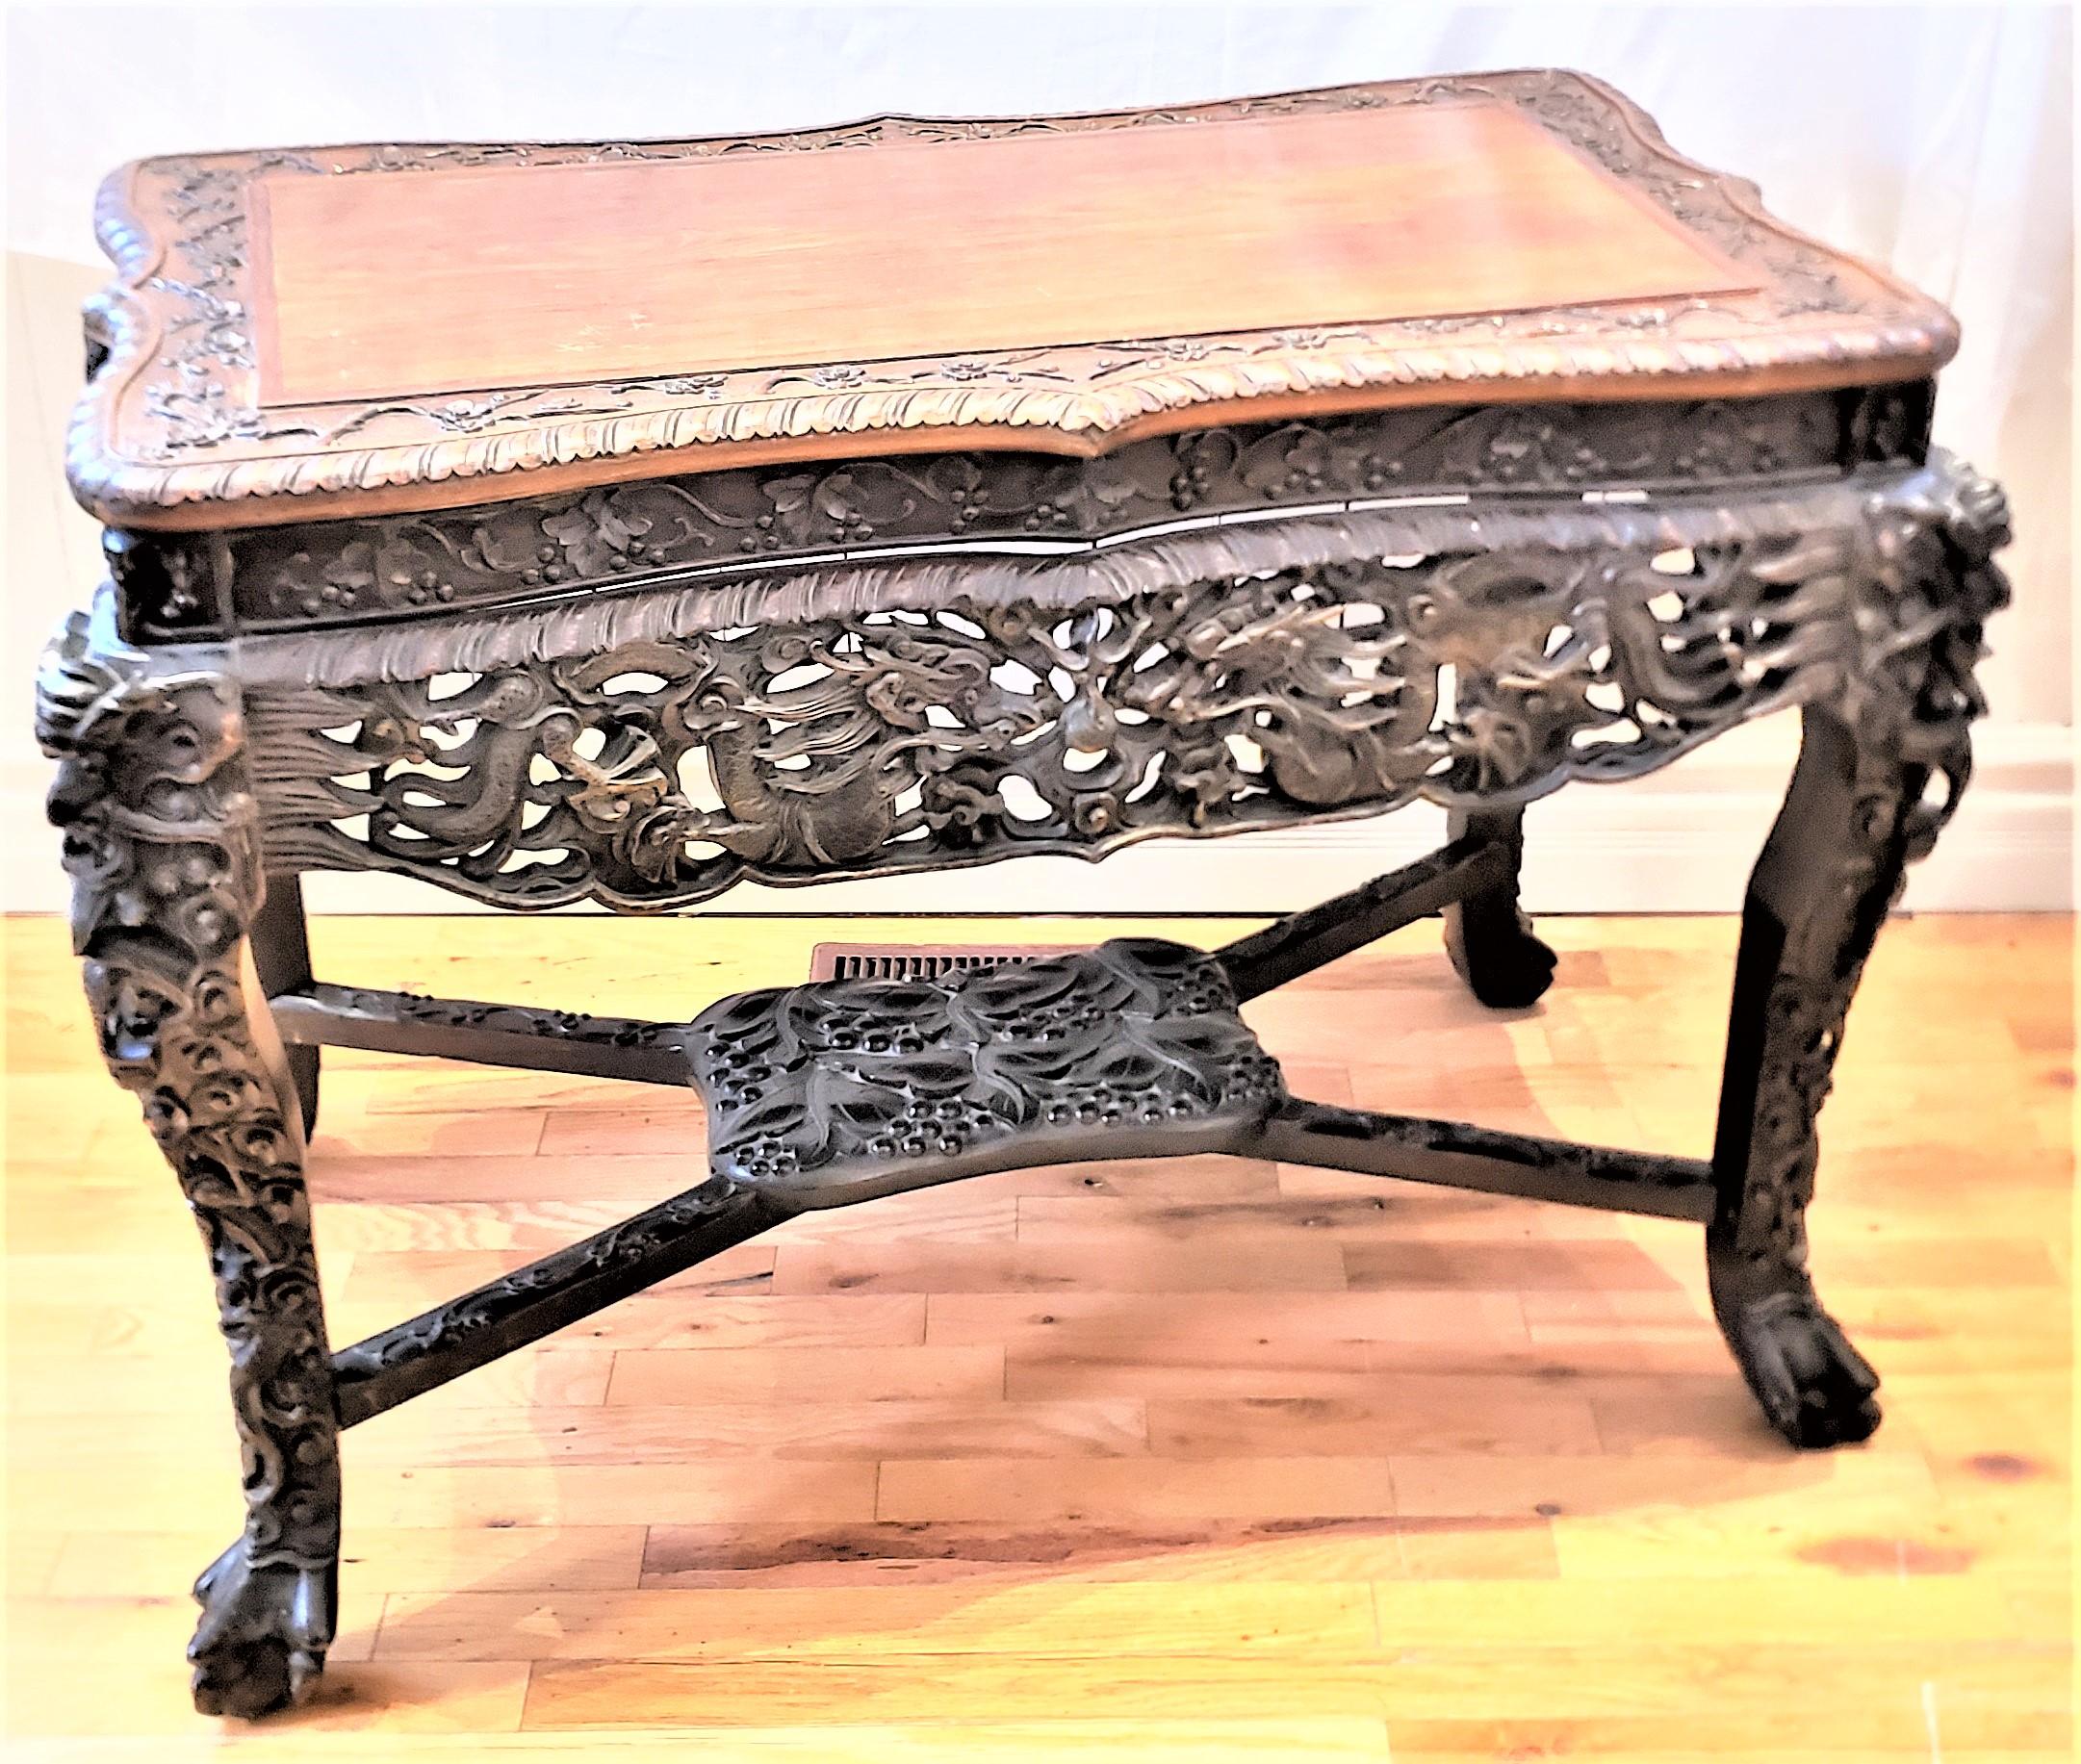 This antique very ornately carved hardwood writing or accent table is unsigned, but presumed to originate from China and date to approximately 1890 and done in the period Qing style. The table is composed of elm with a serpentine curved top with a